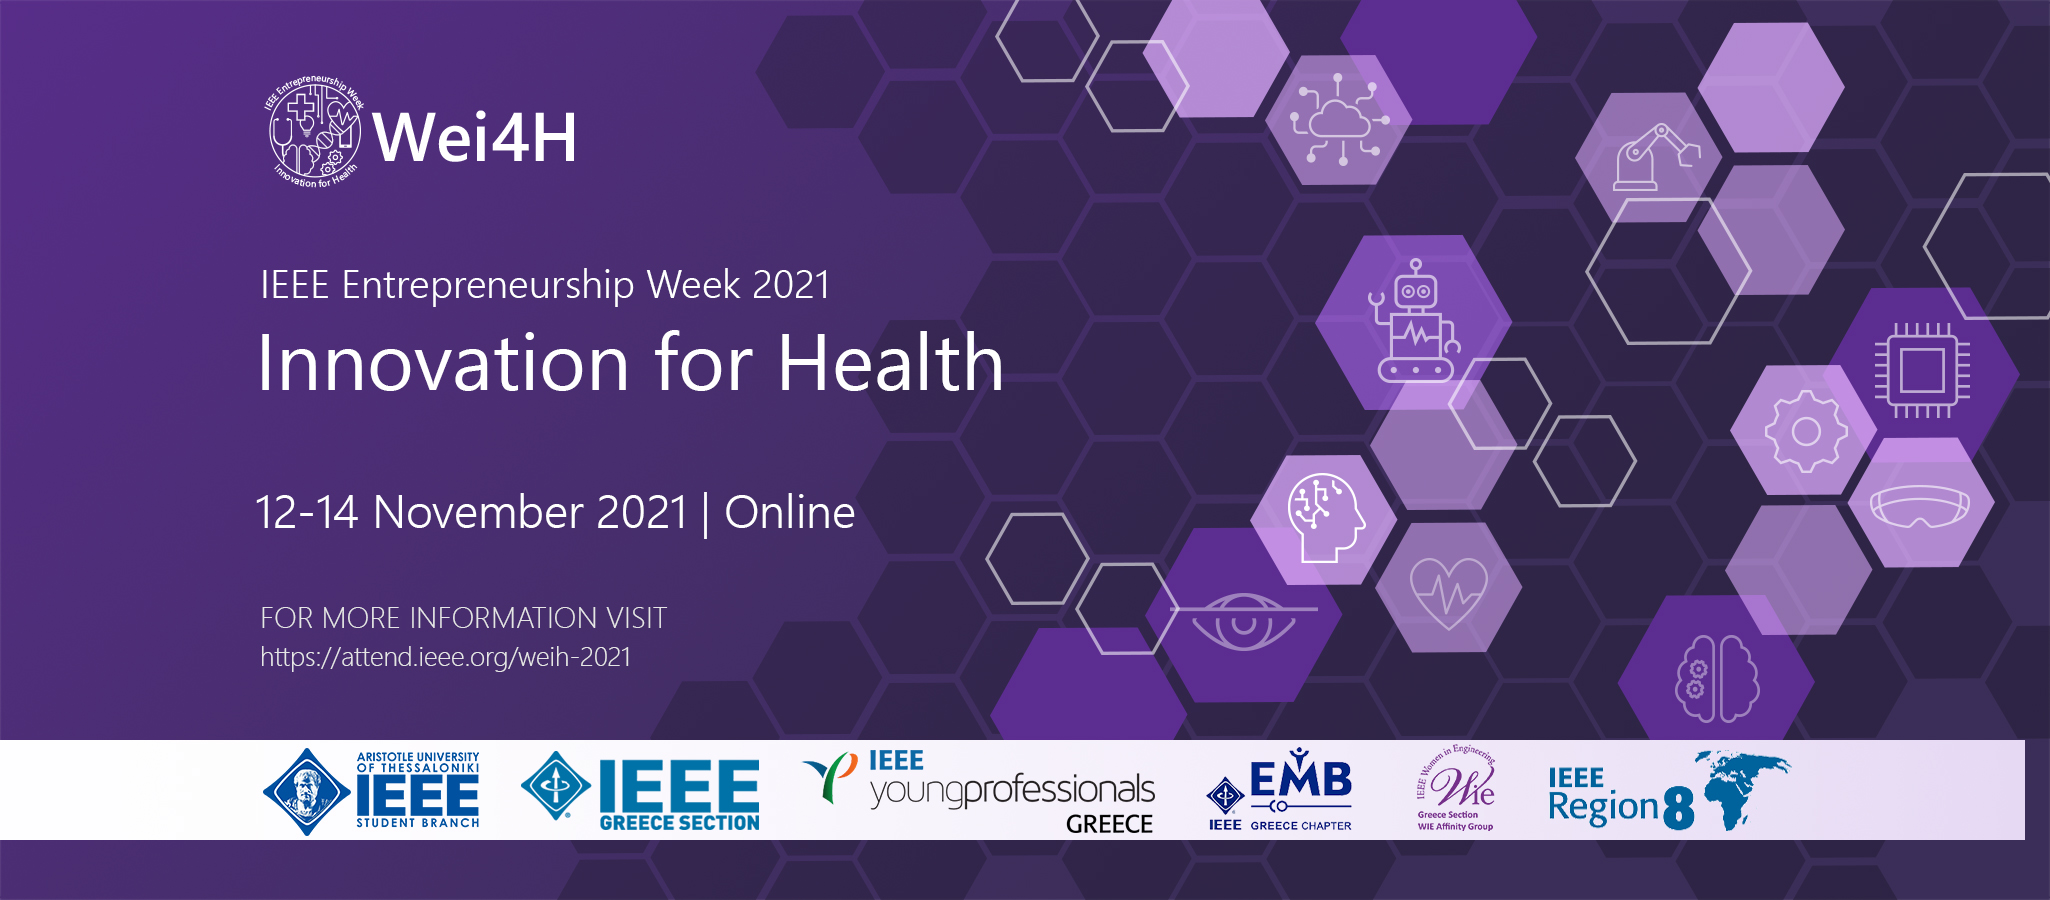 You are currently viewing Innovation for Health – IEEE Entrepreneurship Week (Wei4H) 2021